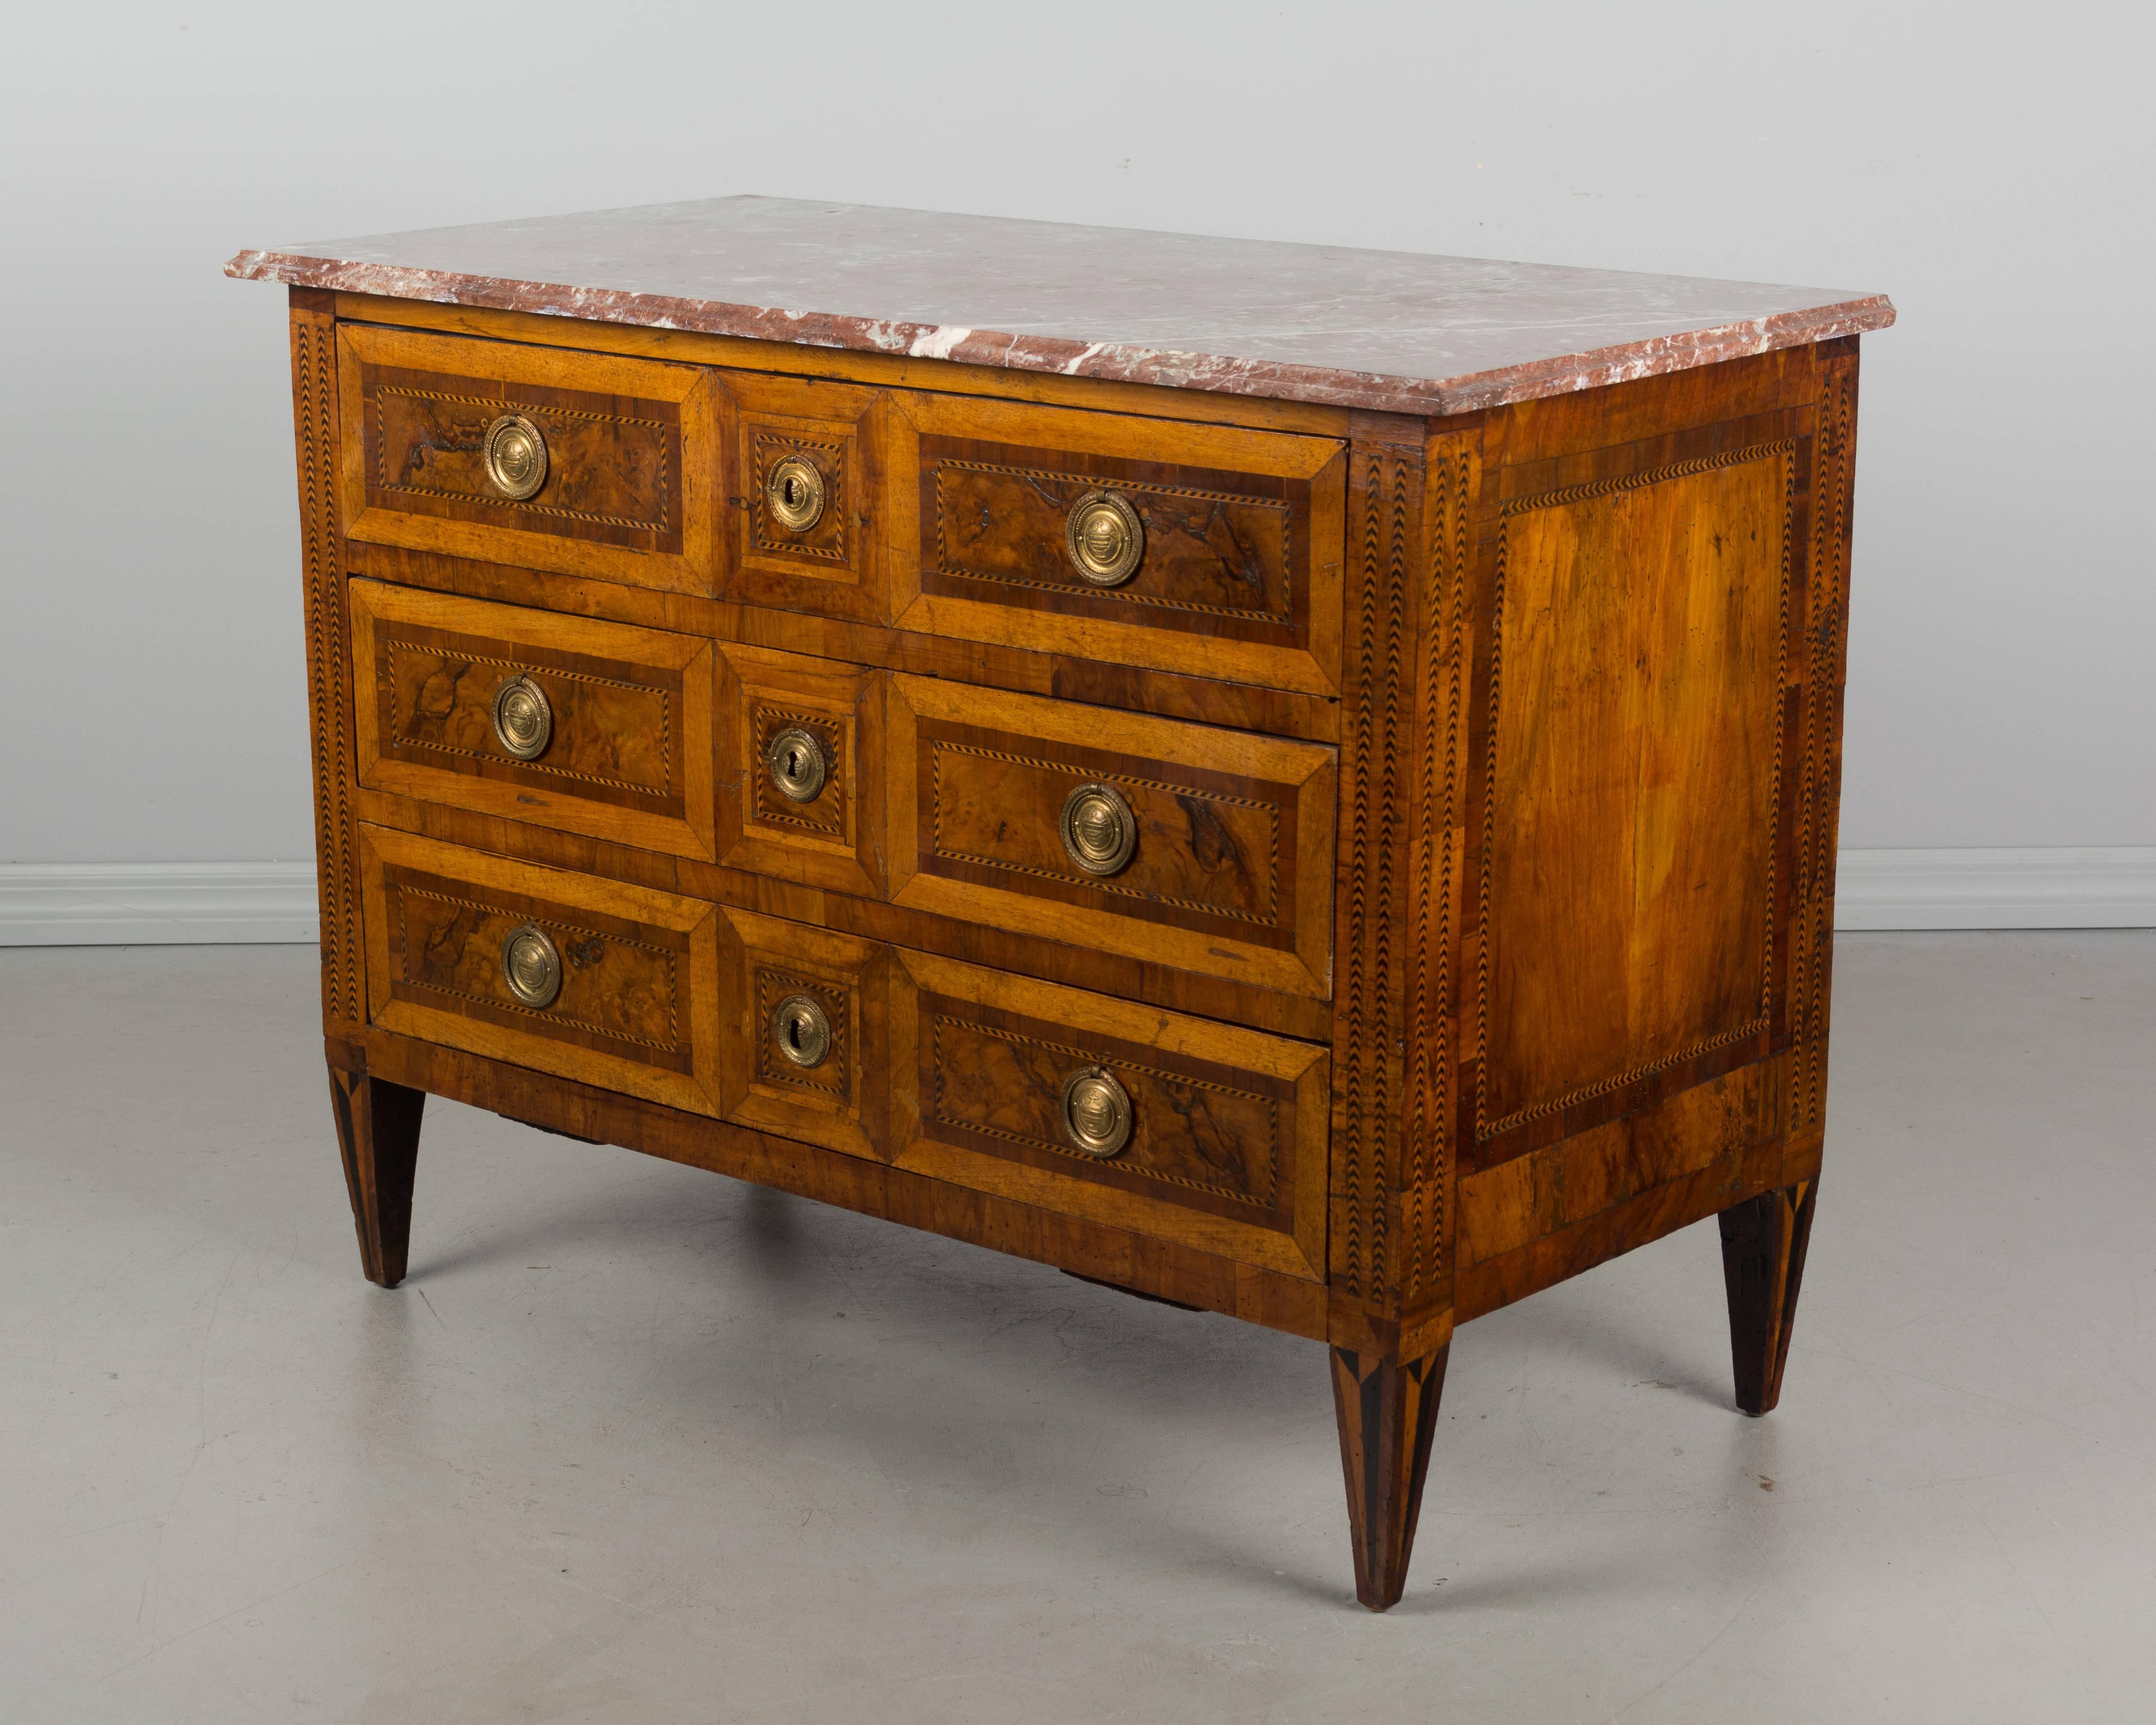 An 18th century Louis XVI marquetry commode with three dovetailed drawers and red veined marble top. Made of veneers of walnut and inlaid with various woods. The hardware is not original to the piece, but is of the same time period. Locks are